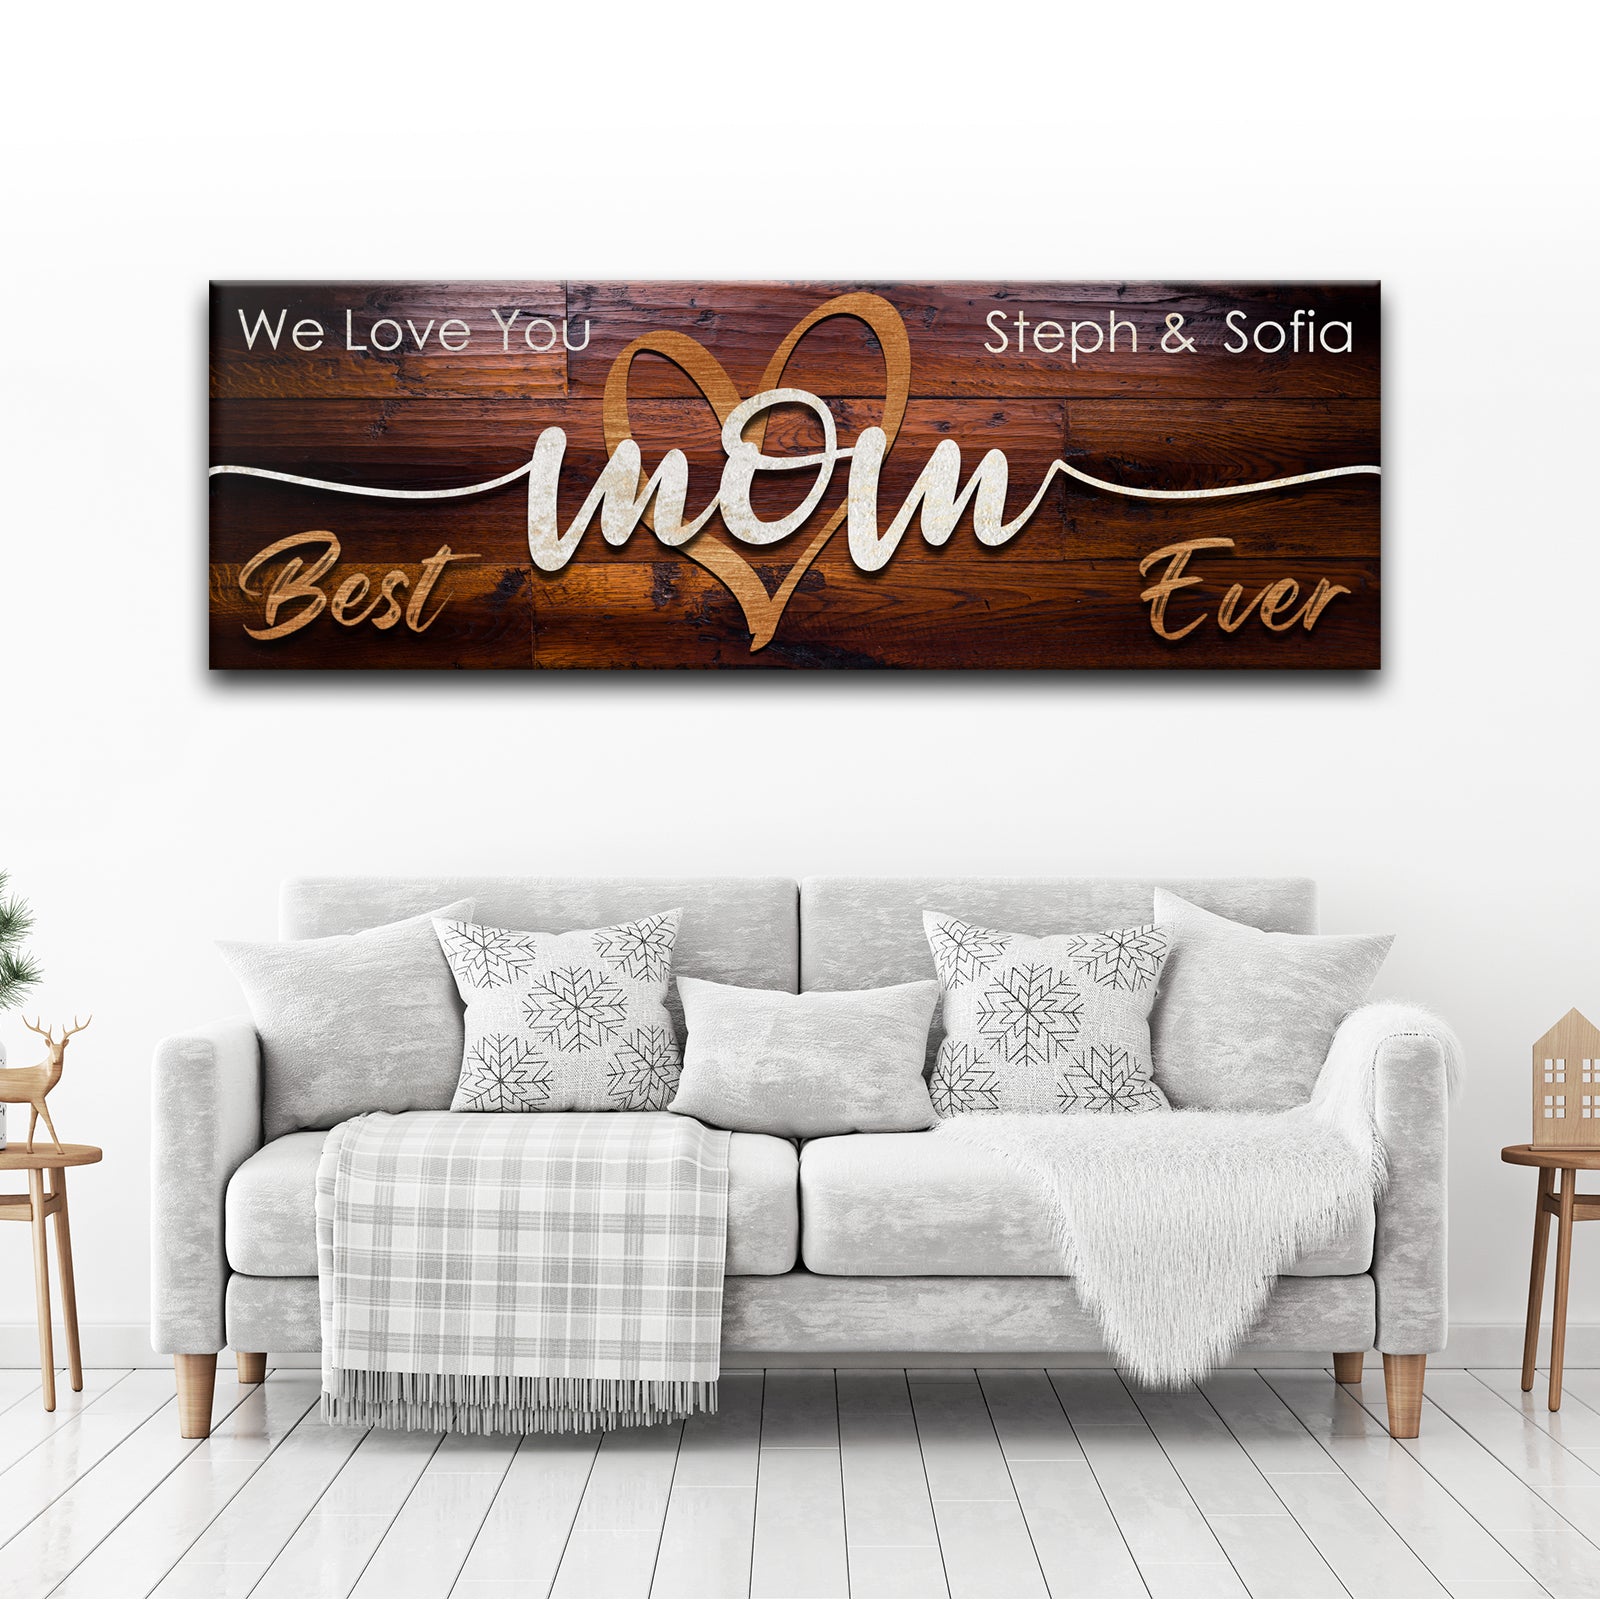 Best MOM Ever Sign - Image by Tailored Canvases